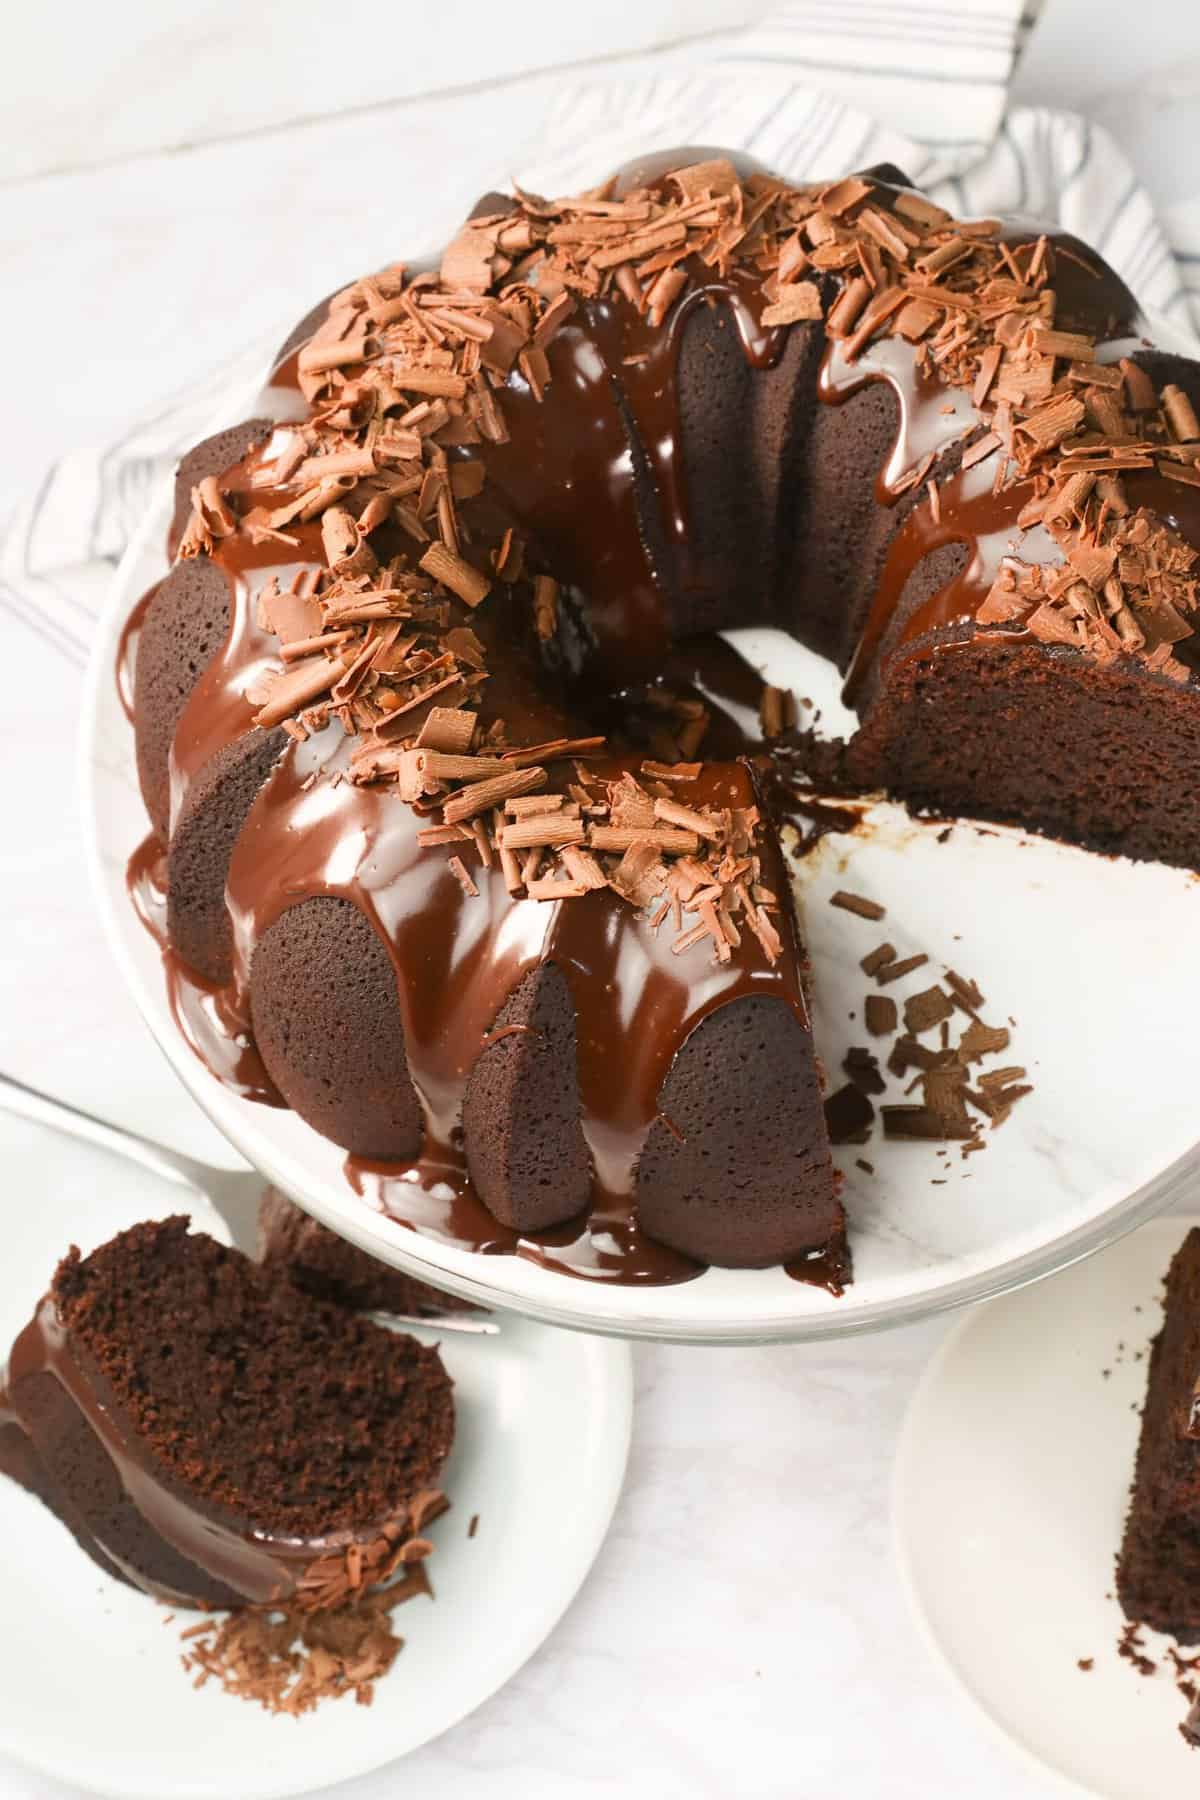 Slicing up to serve a ridiculously delicious and sweet tooth satisfying chocolate bundt cake